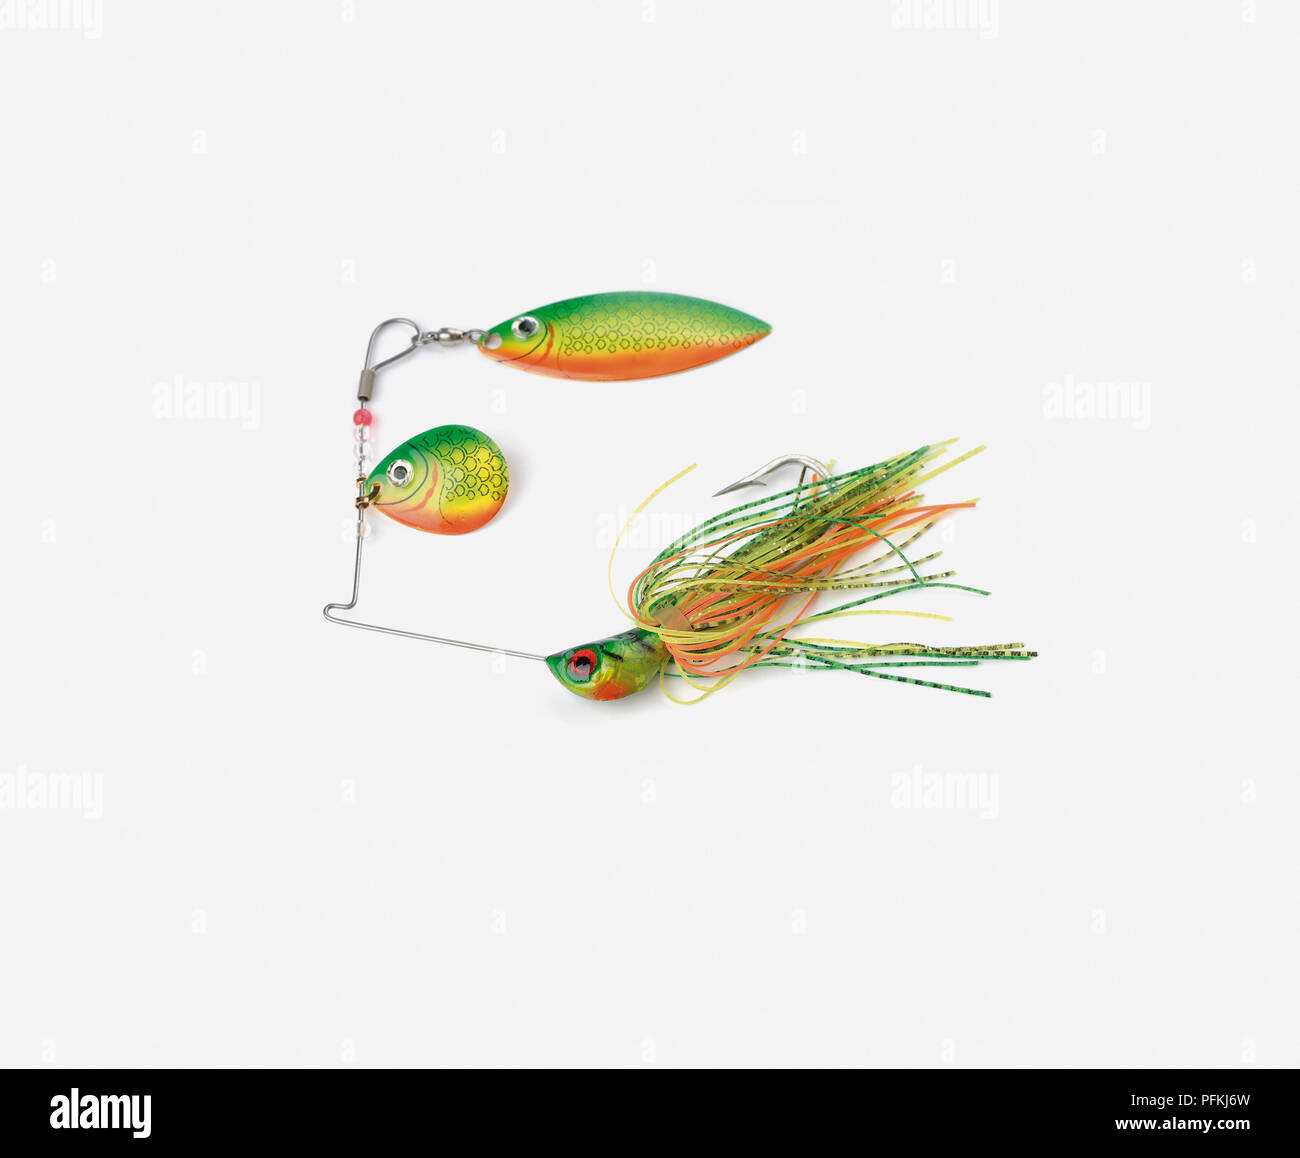 Hornet spinner, a type of freshwater fishing lure Stock Photo - Alamy